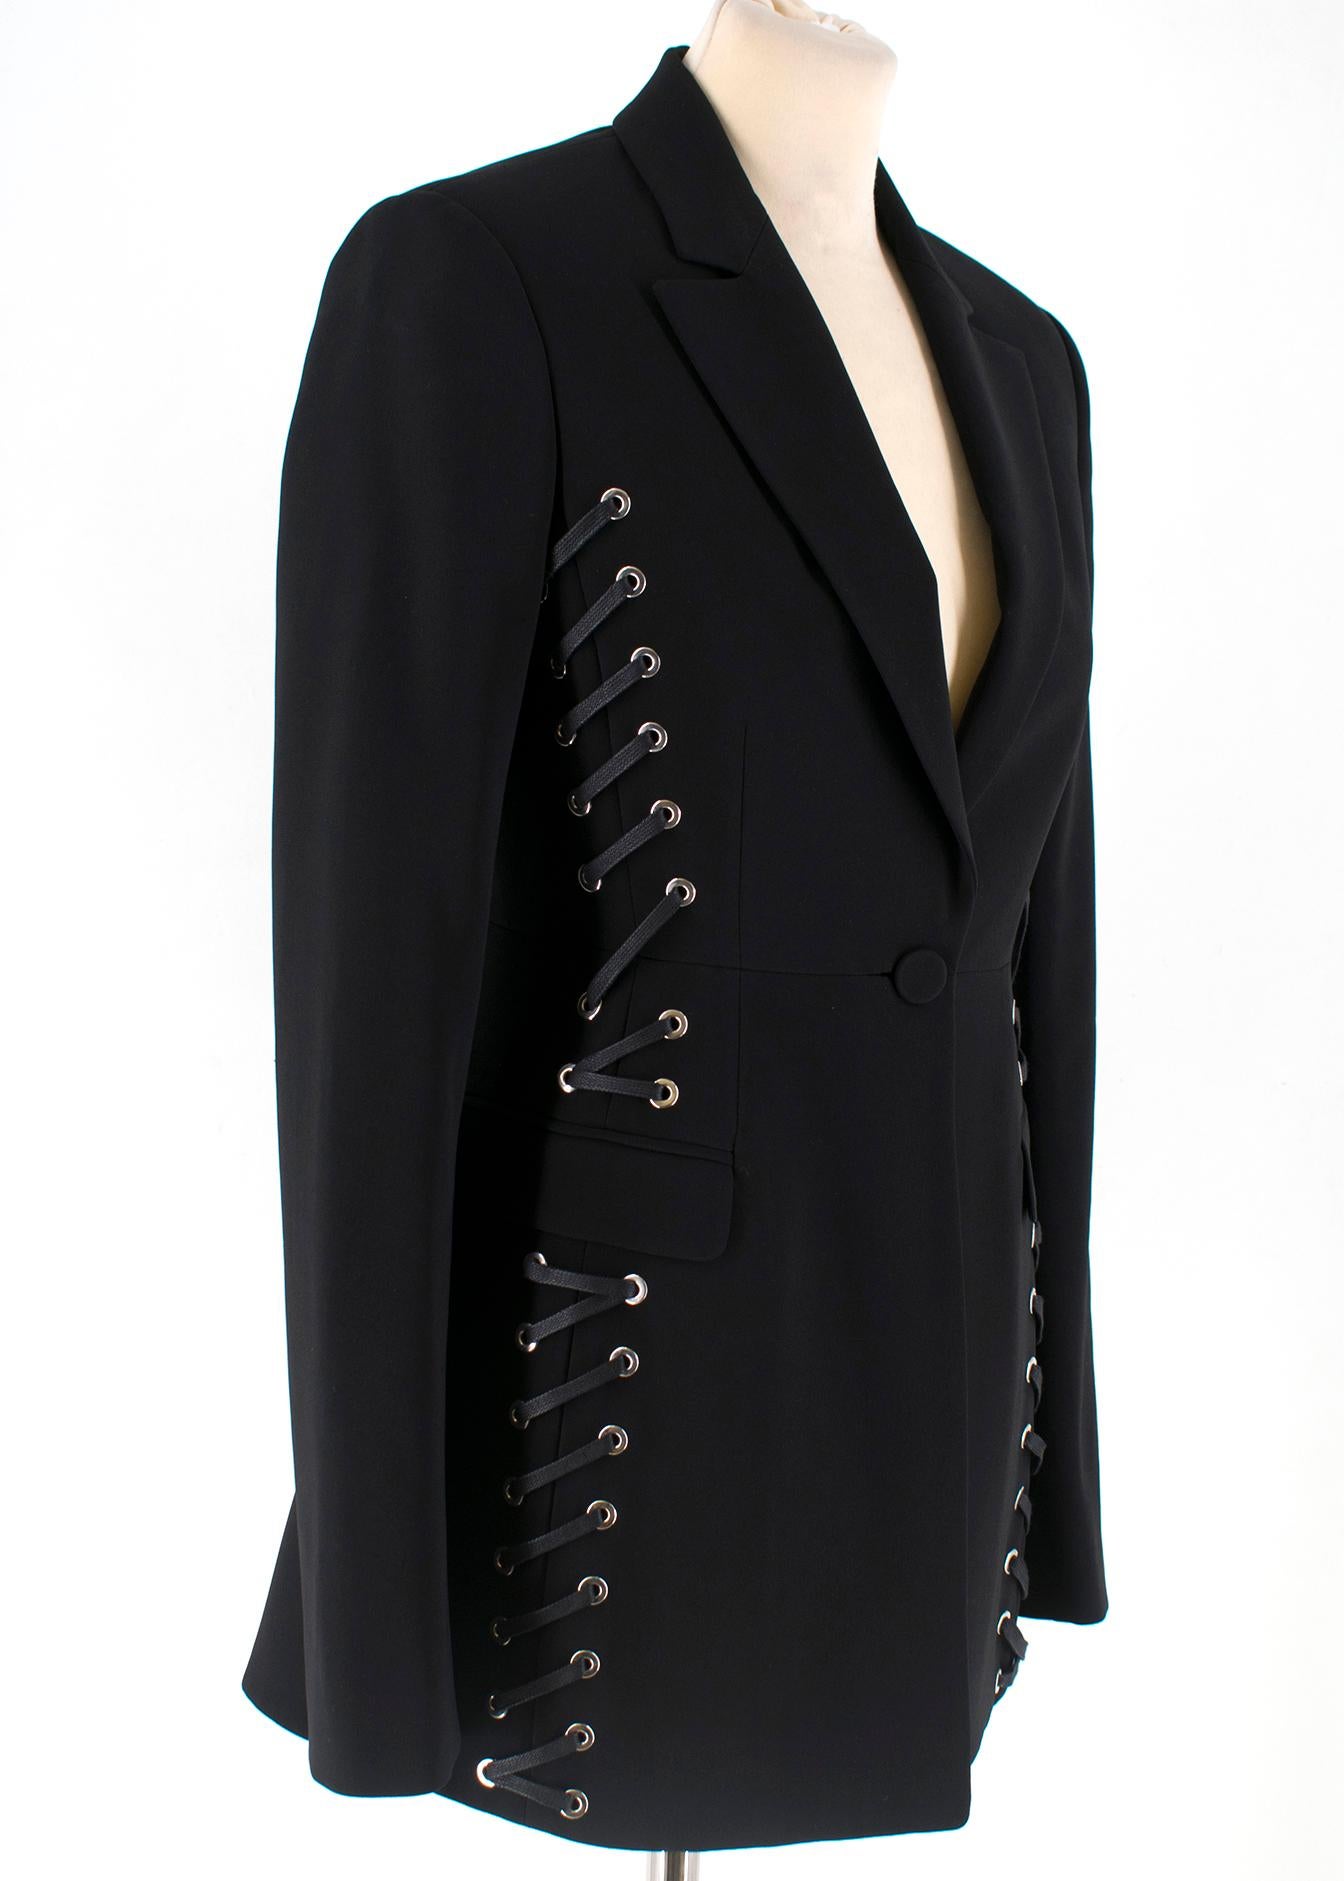 Altuzarra Women's Black Merrie Laced Blazer in size 36. Altuzarra merges sassiness with utility in this blazer. Decorated with intricate laces, light shoulder puffs, pockets and a singular black button. 


- Pre fall 2015 collection
- Dry clean